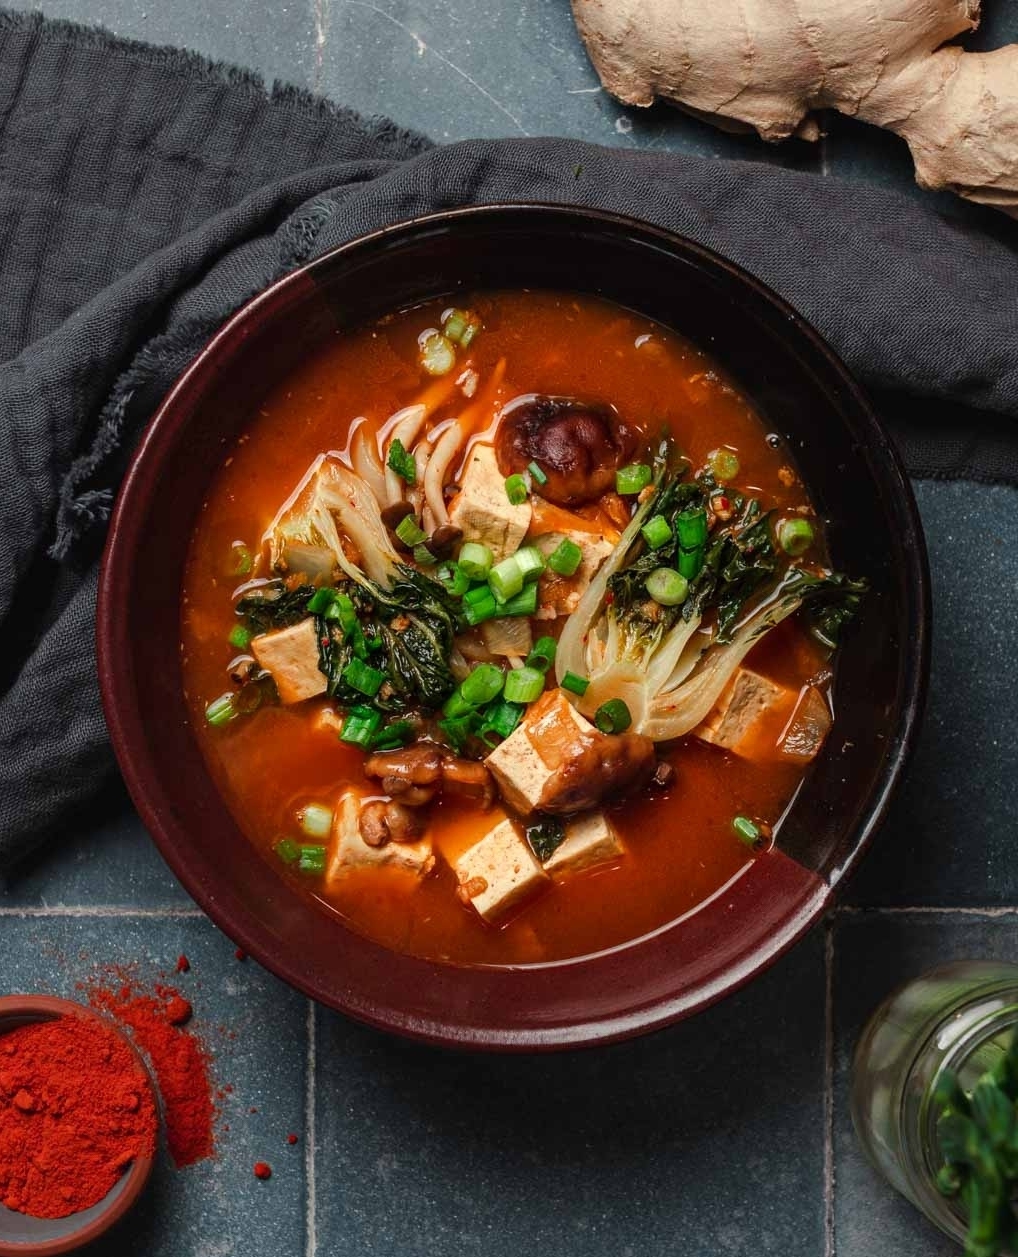 This may be one of my favourite recipes ever. 😍 We've always loved Korean food – the deep flavours, bold heat, and vibrant colours are irresistible. Inspired by Korean recipes like Kimchi jjigae (김치찌개), we made a delicious Vegan Kimchi Soup perfect to keep you warm all winter long.⁠
⁠
This Vegan Kimchi Soup features medium-firm tofu, tender shiitake mushrooms, fresh bok choy, and an aromatic base of ginger, onion, and garlic. It's warm, cozy, easy to make, and the ultimate comfort food. ⁠
⁠
Get the full recipe at LINK IN BIO 👆 or at www.twomarketgirls.com